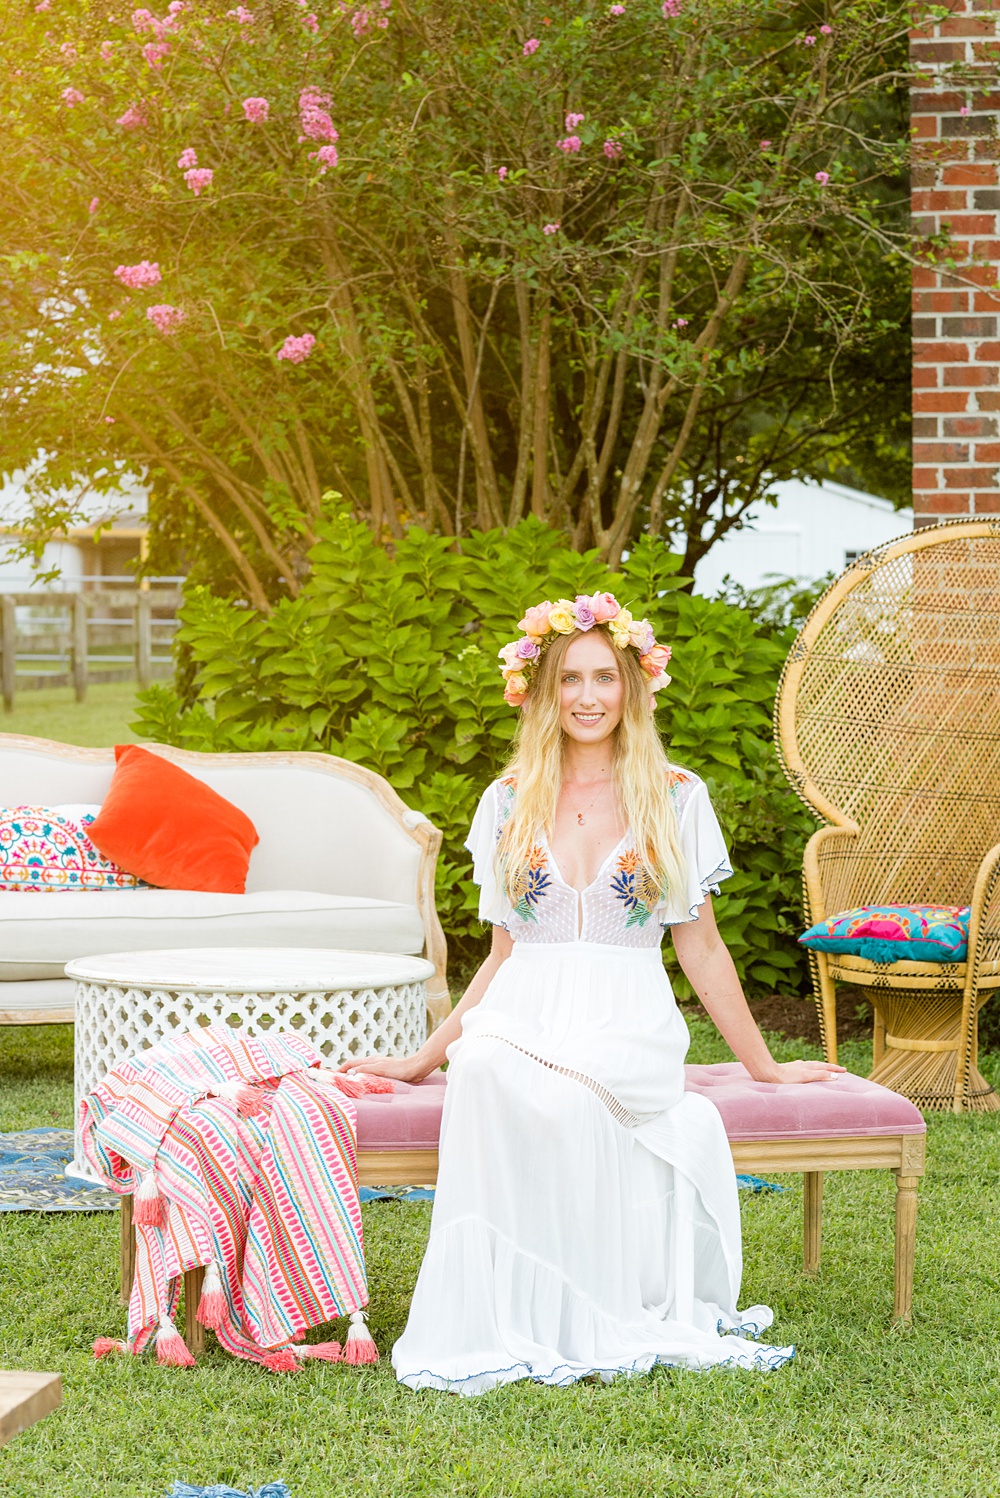 Step inside this colorful outdoor bohemian thirtieth birthday party. Full of color, lush garden flowers, and the yummiest vegan unicorn confetti cakes you ever did find! Click through for the details. Mikkel Paige Photography #gardenparty #birthdayparty #bohemianparty #unicornparty #styledshoot #backyardparty #flowers | glitterinc.com | @glitterinc